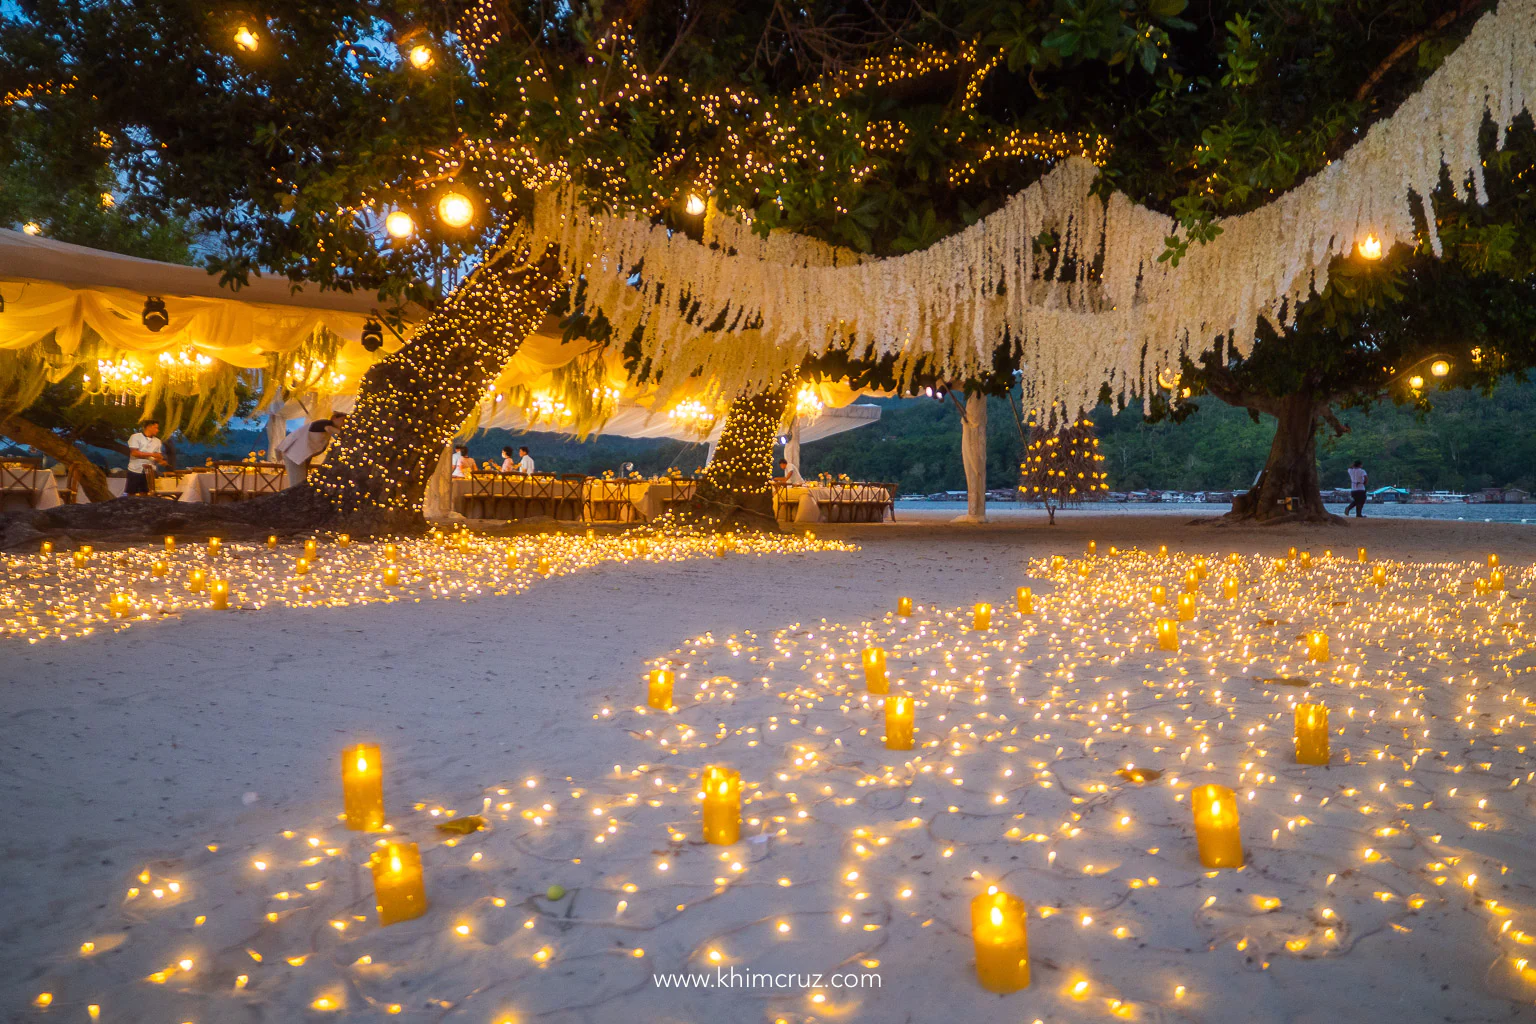 warm lights on trees and sand of beach lead the path to the wedding reception by Khim Cruz